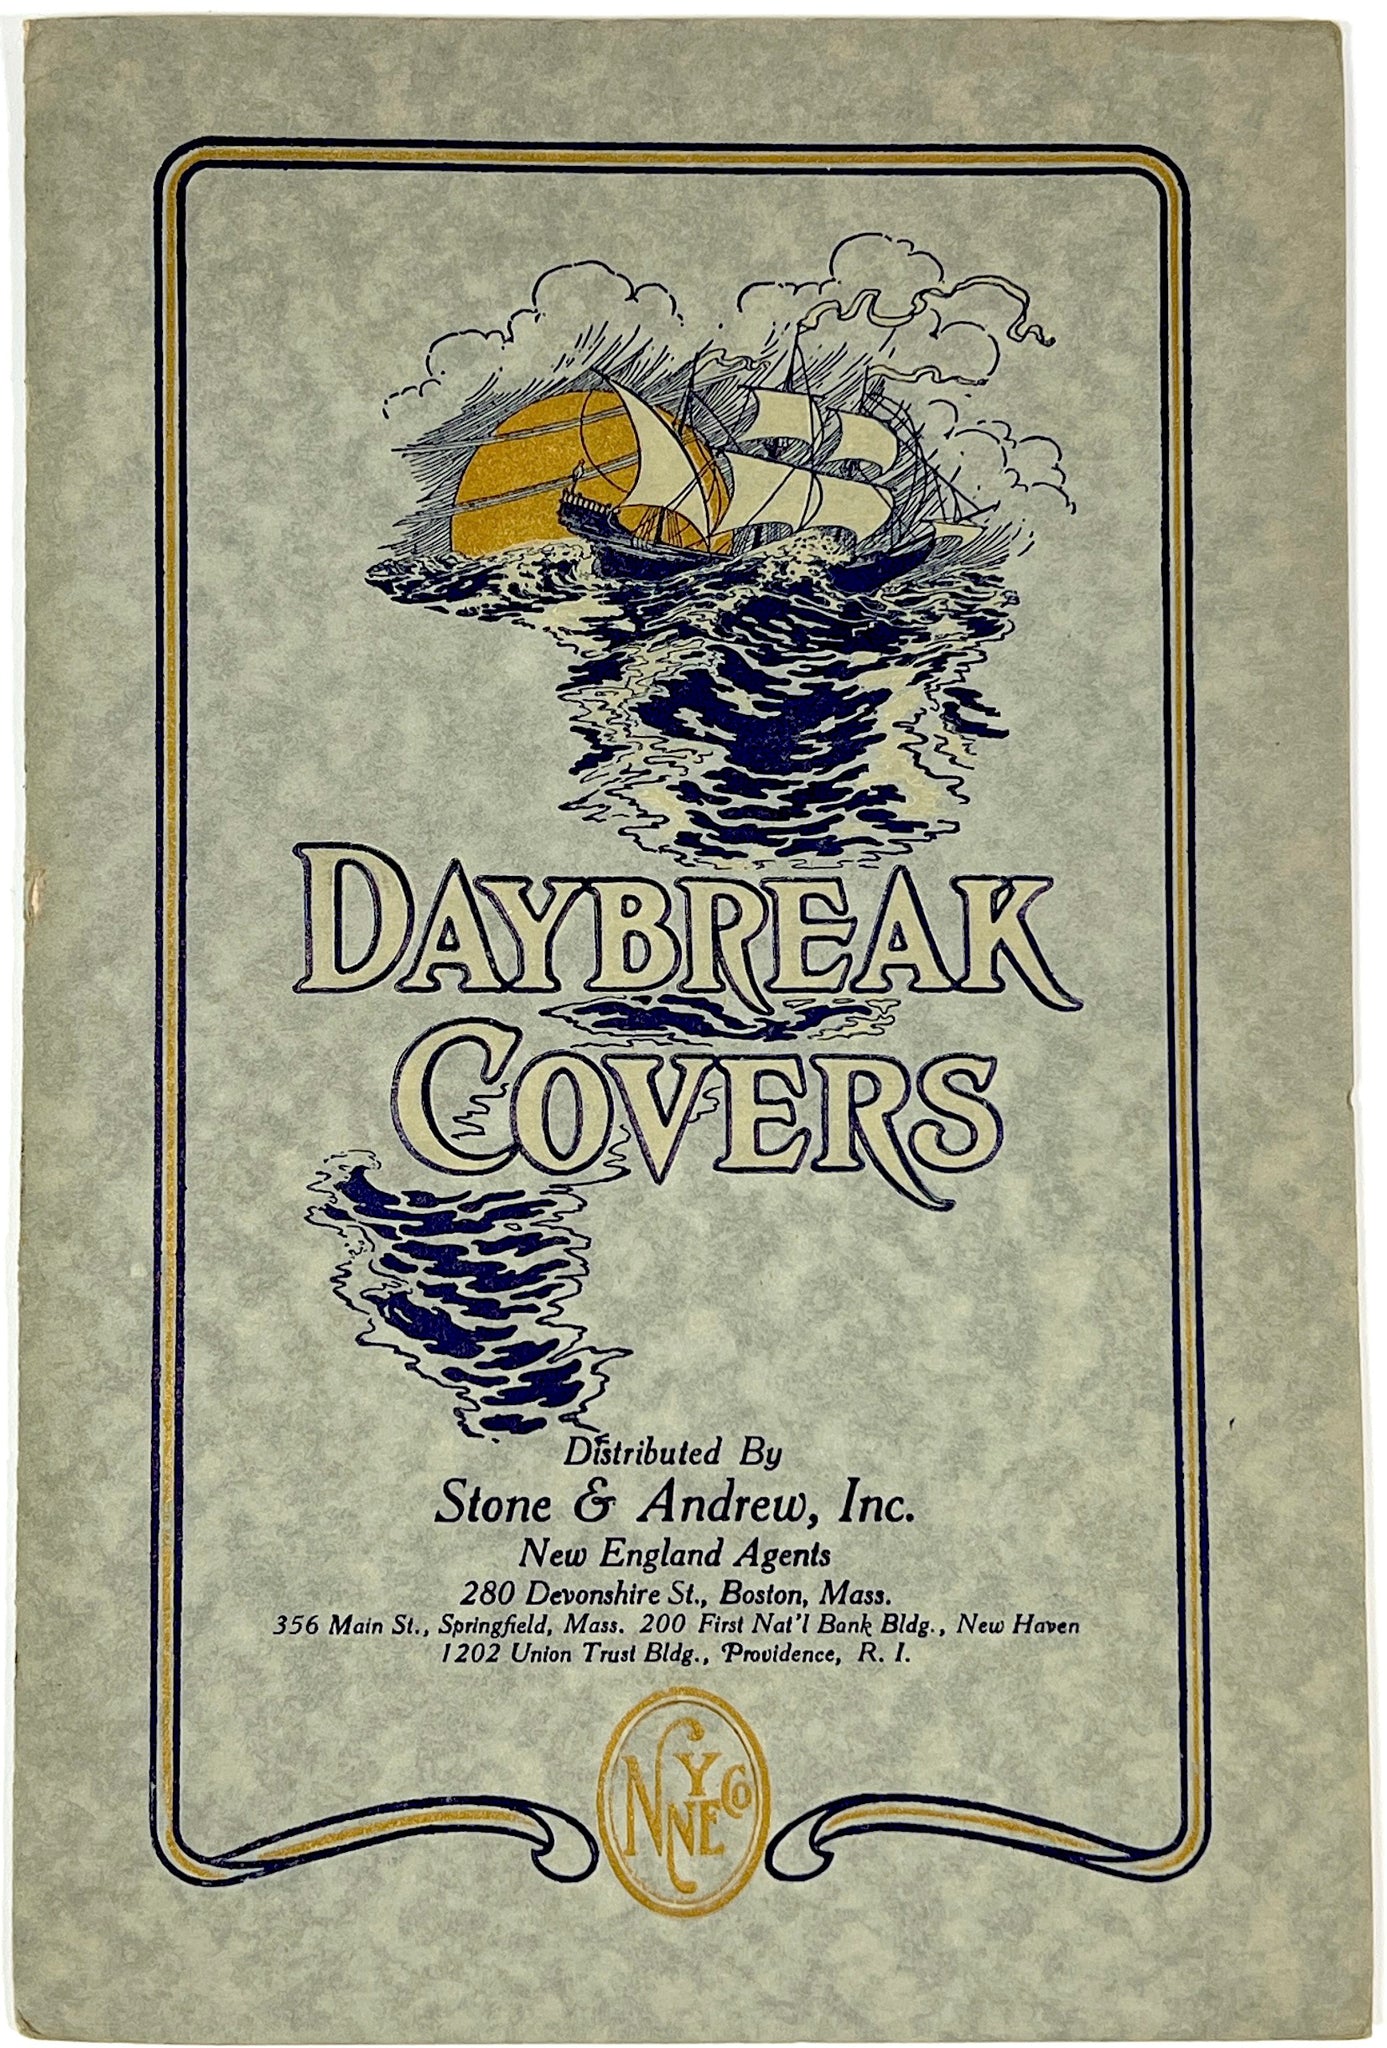 Daybreak Covers (New York-New England Co. paper sample book)